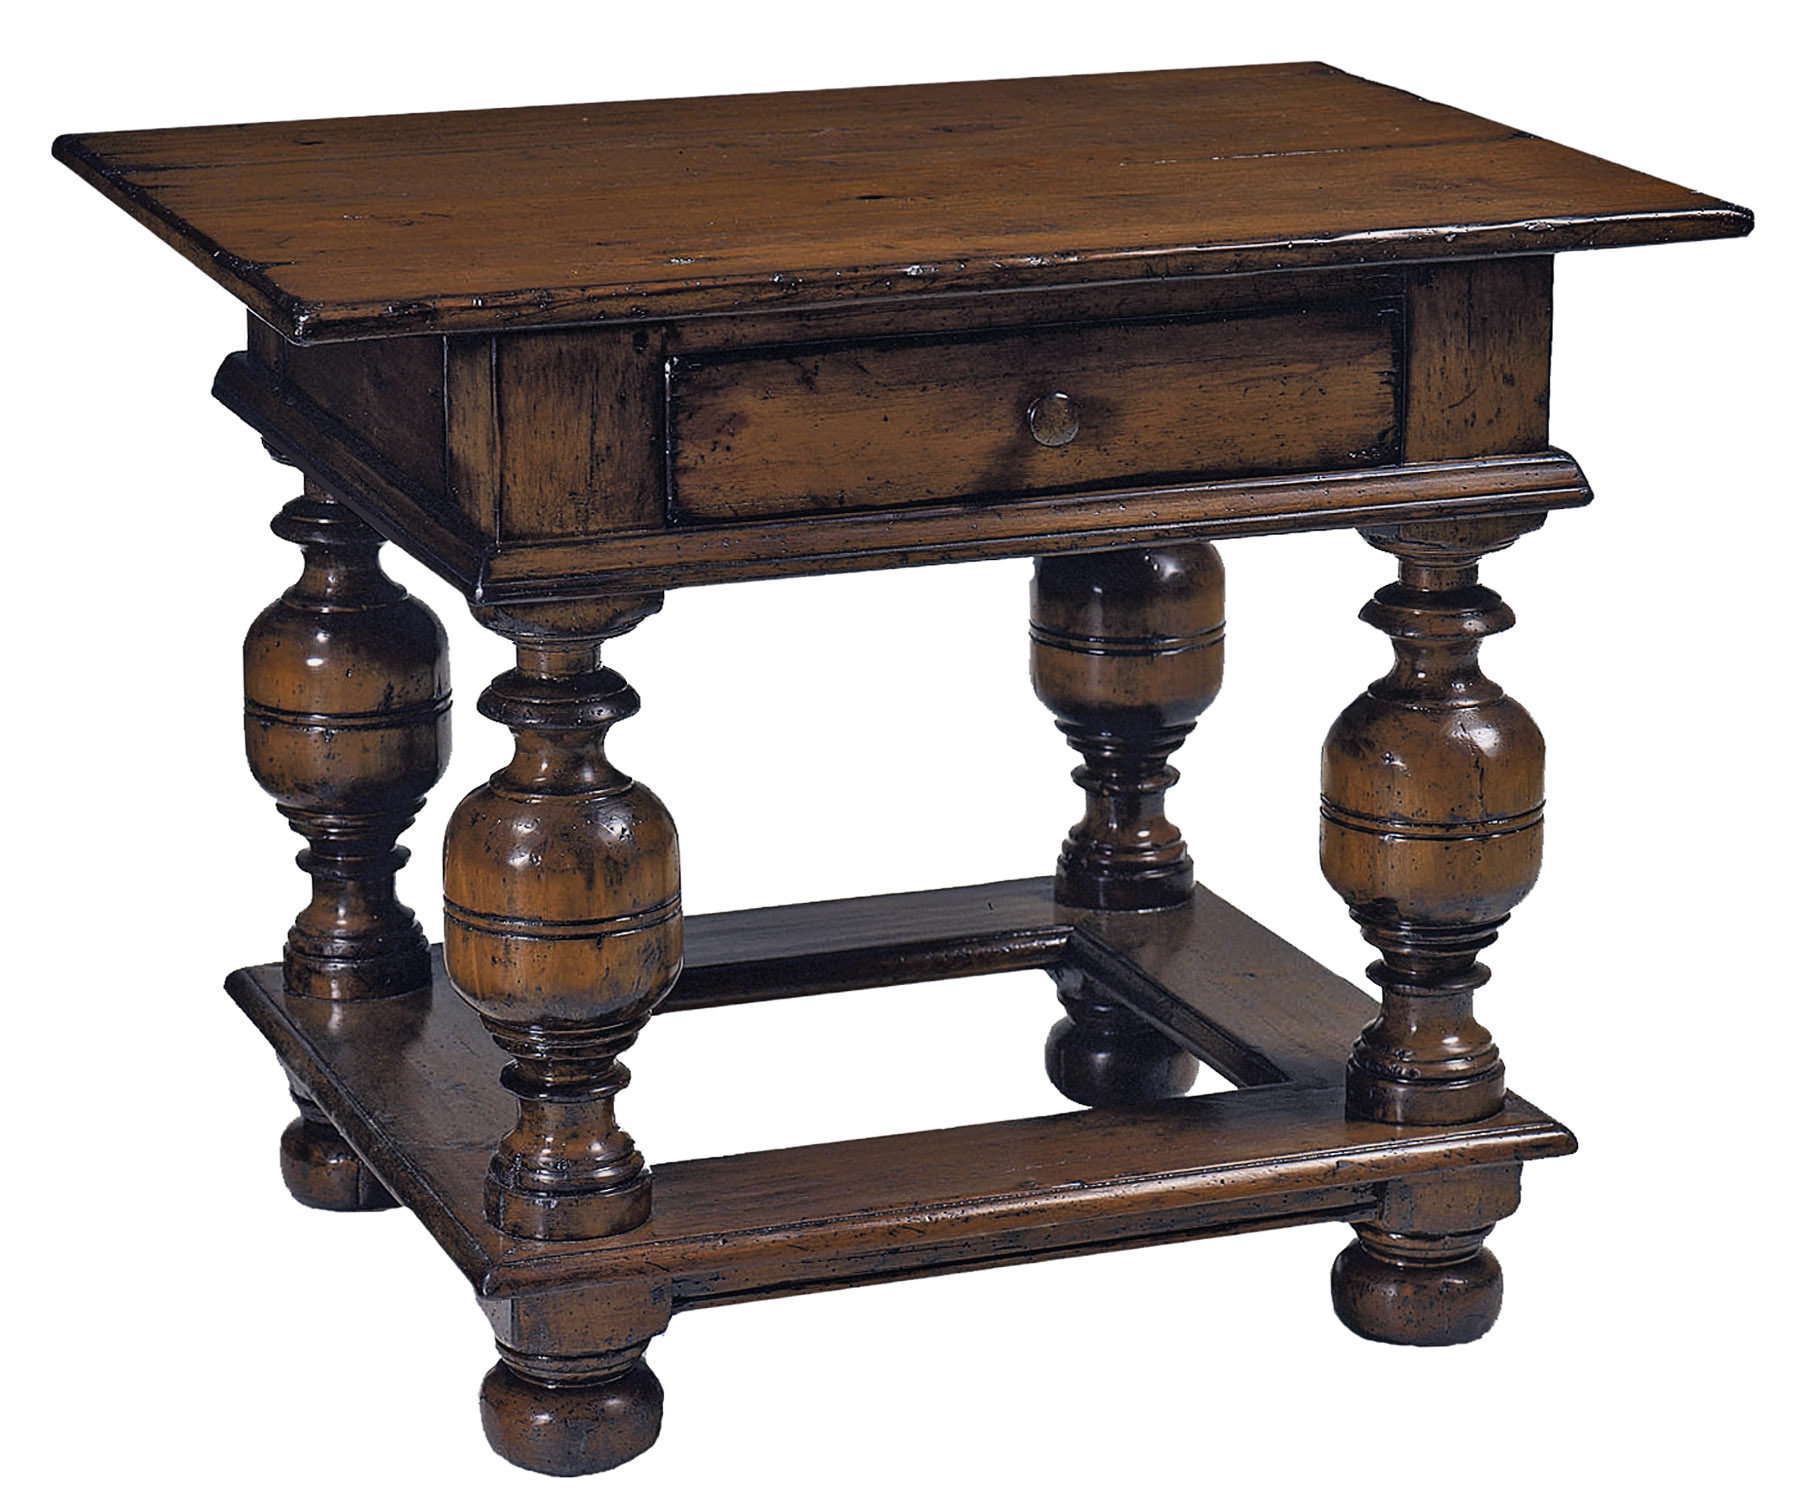 Caetano traditional side or end table with barrel legs by Woodland furniture in Idaho Falls